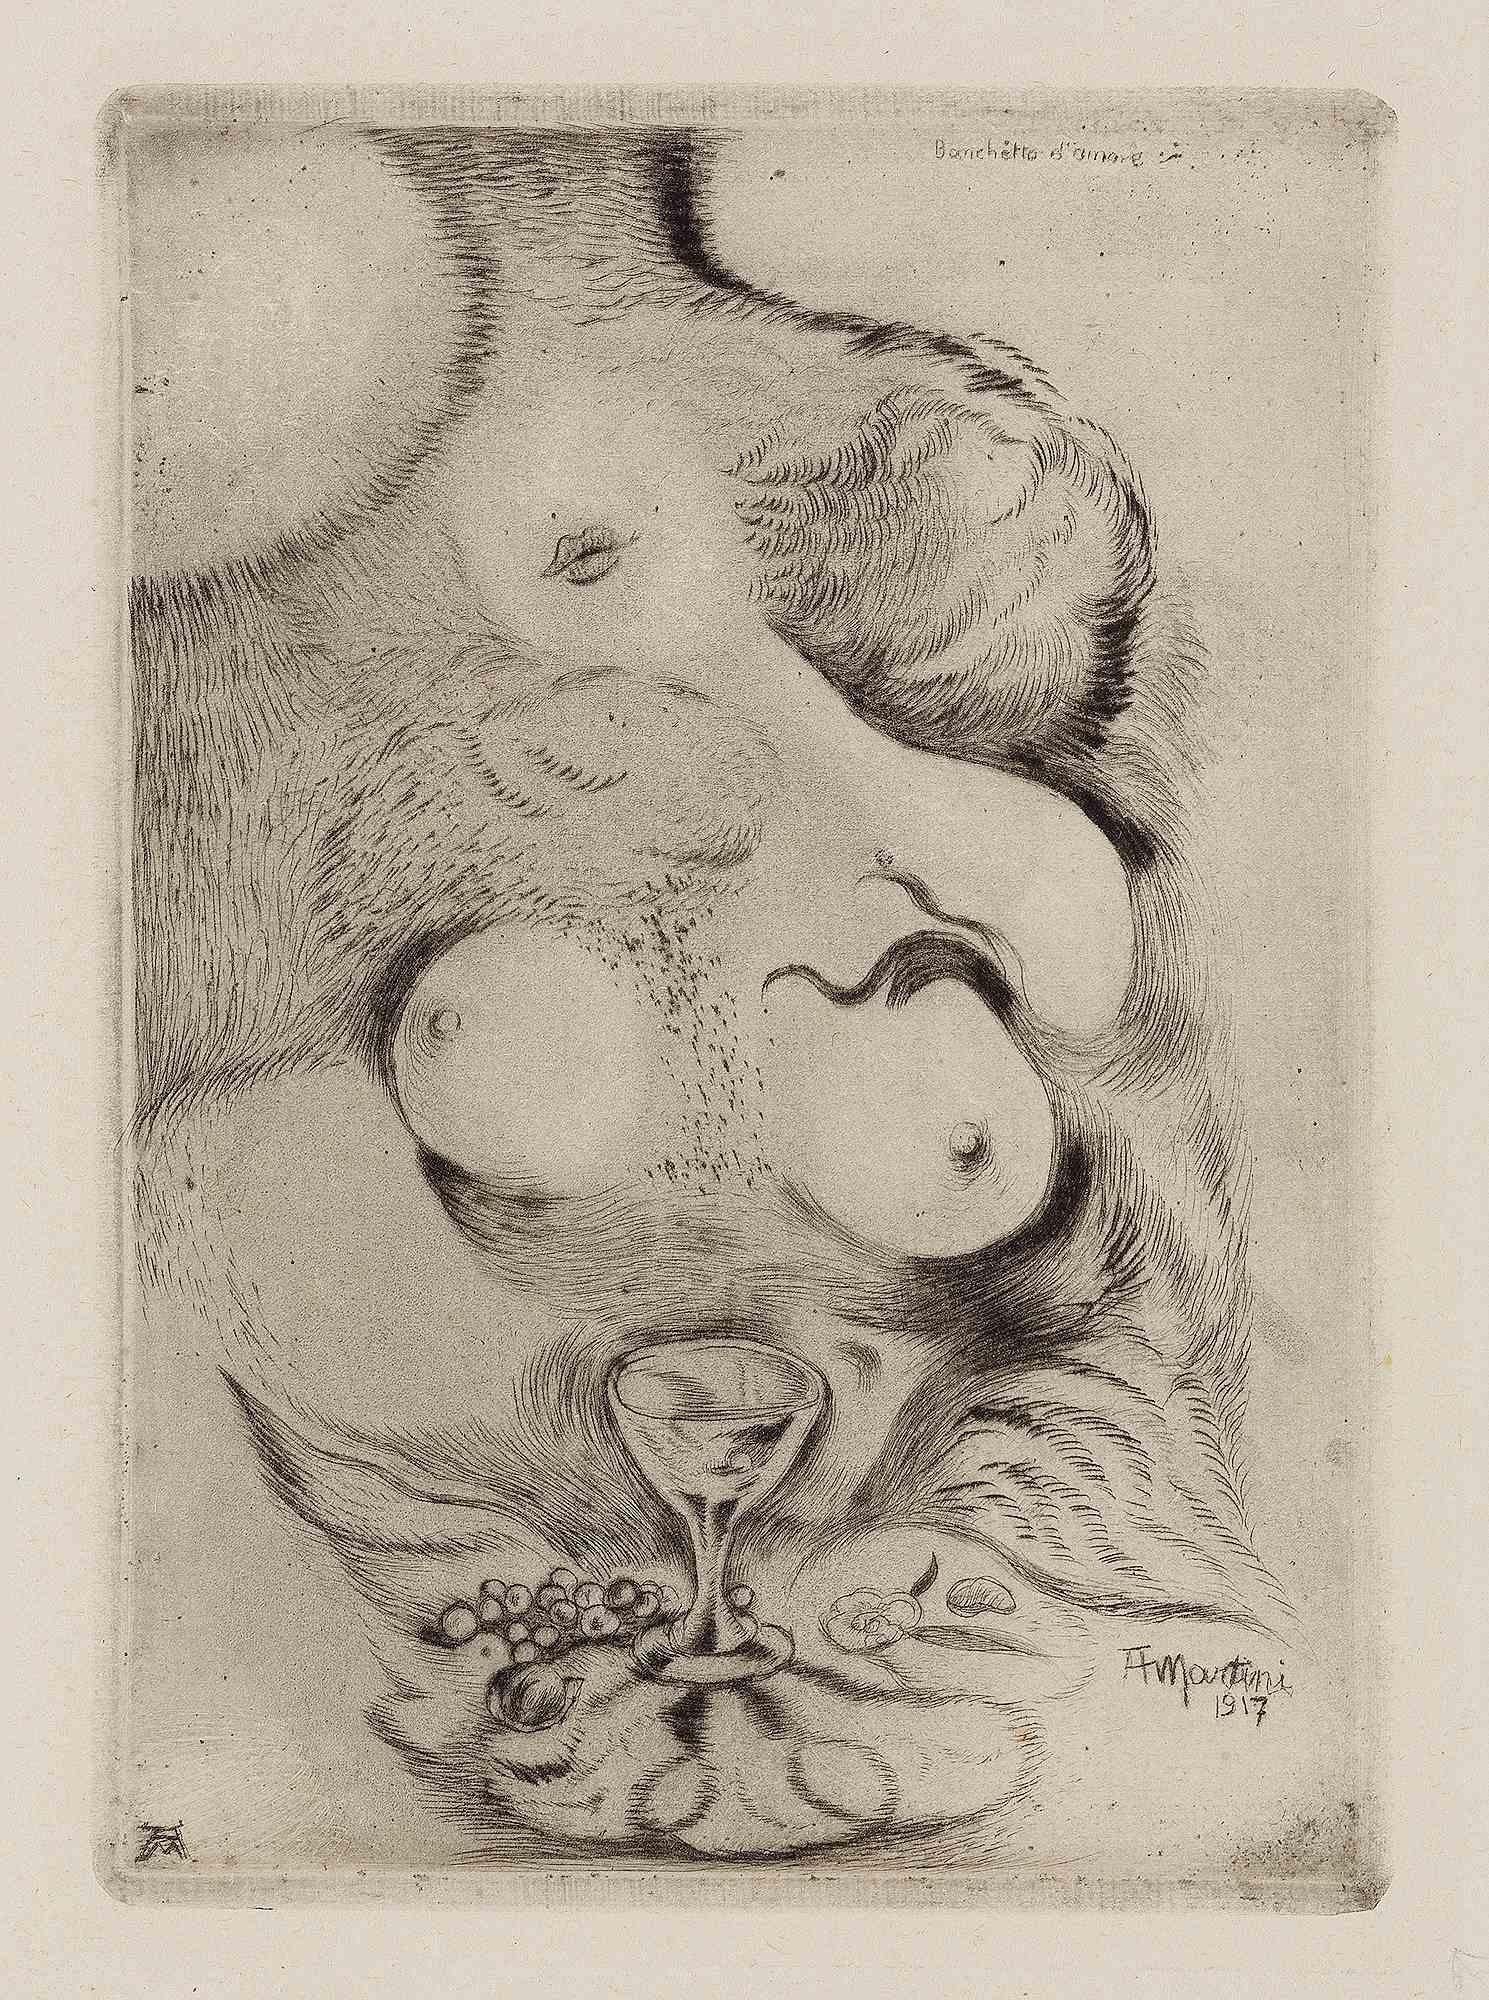 Banquet of love is a modern artwork realized by Alberto Martini in 1917.

Etching and drypoint. Second state of three. 

Signed on plate

Printed in 1945 in 25 specimen.

Alberto Martini (Oderzo, 1876 - Milan, 1954); he was an Italian draftsman,